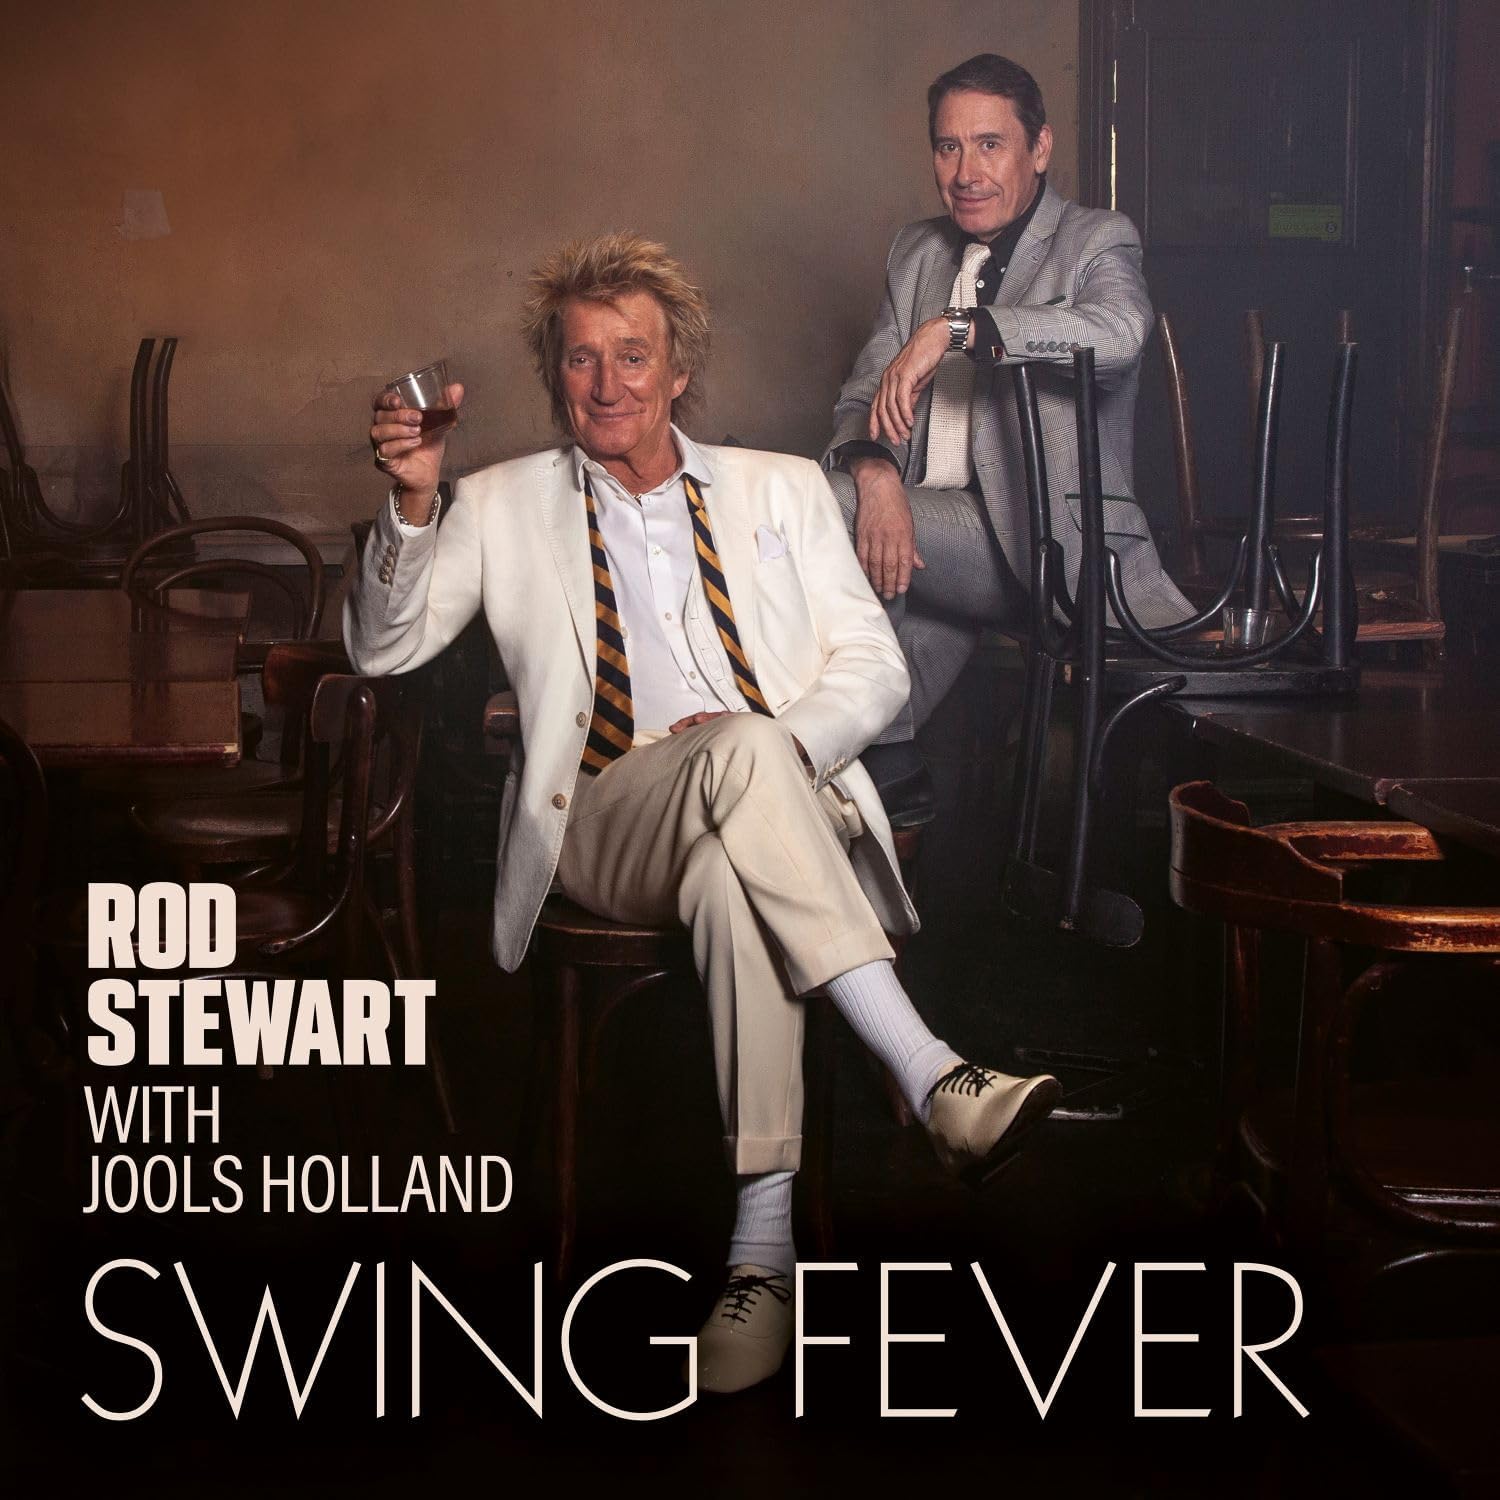 JOOLS HOLLAND - Rod Stewart with Jools Holland : Swing Fever cover 